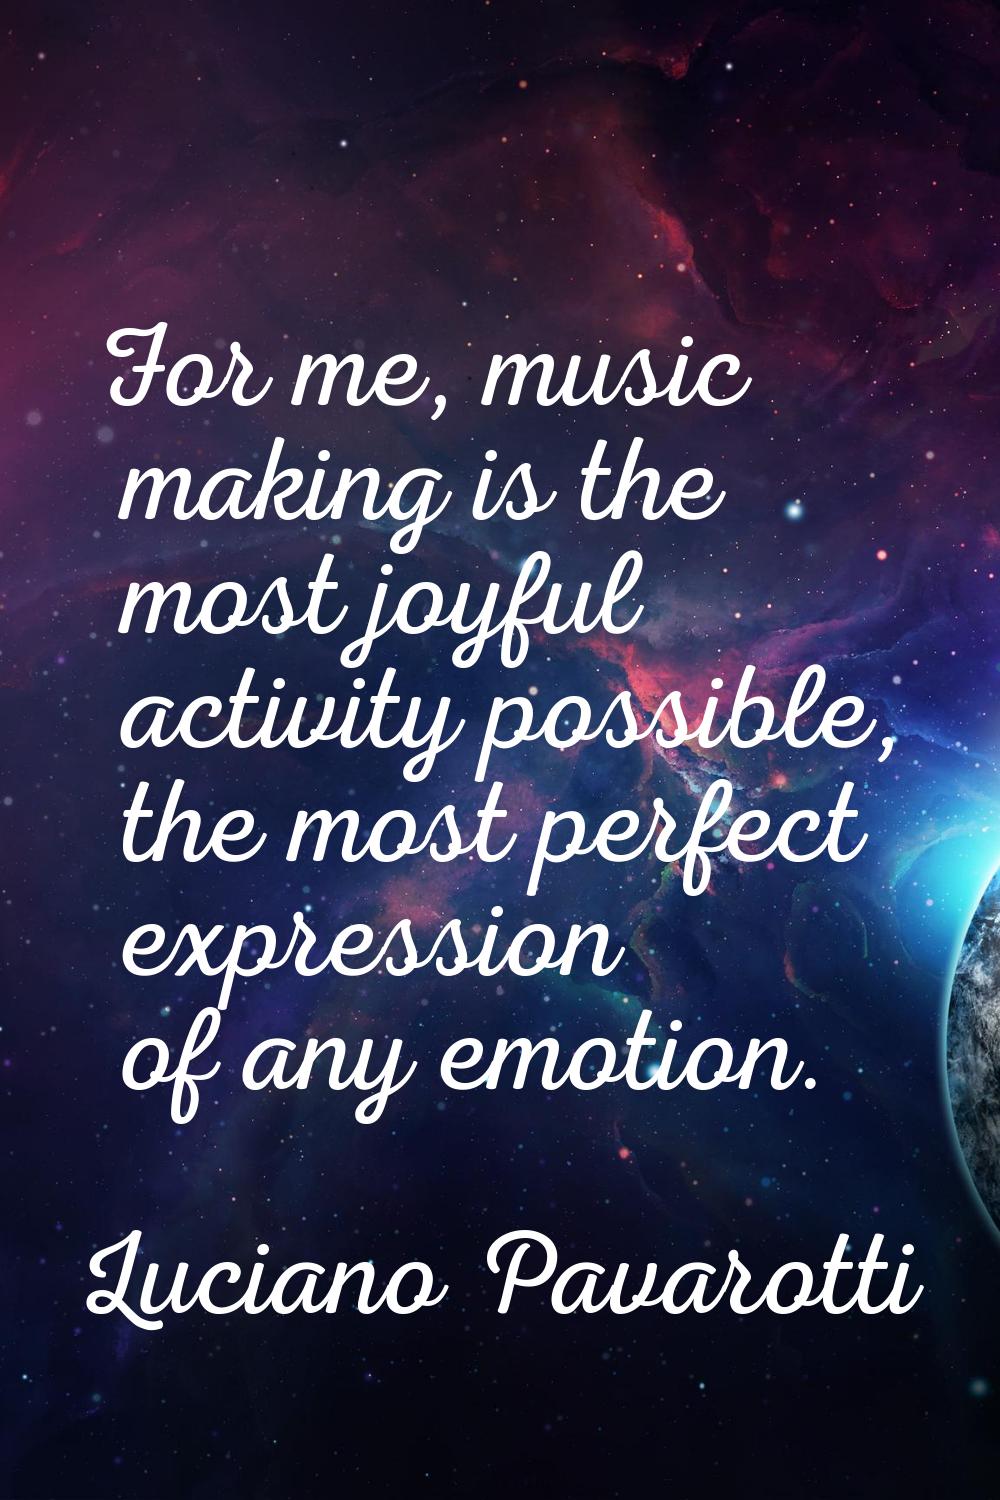 For me, music making is the most joyful activity possible, the most perfect expression of any emoti